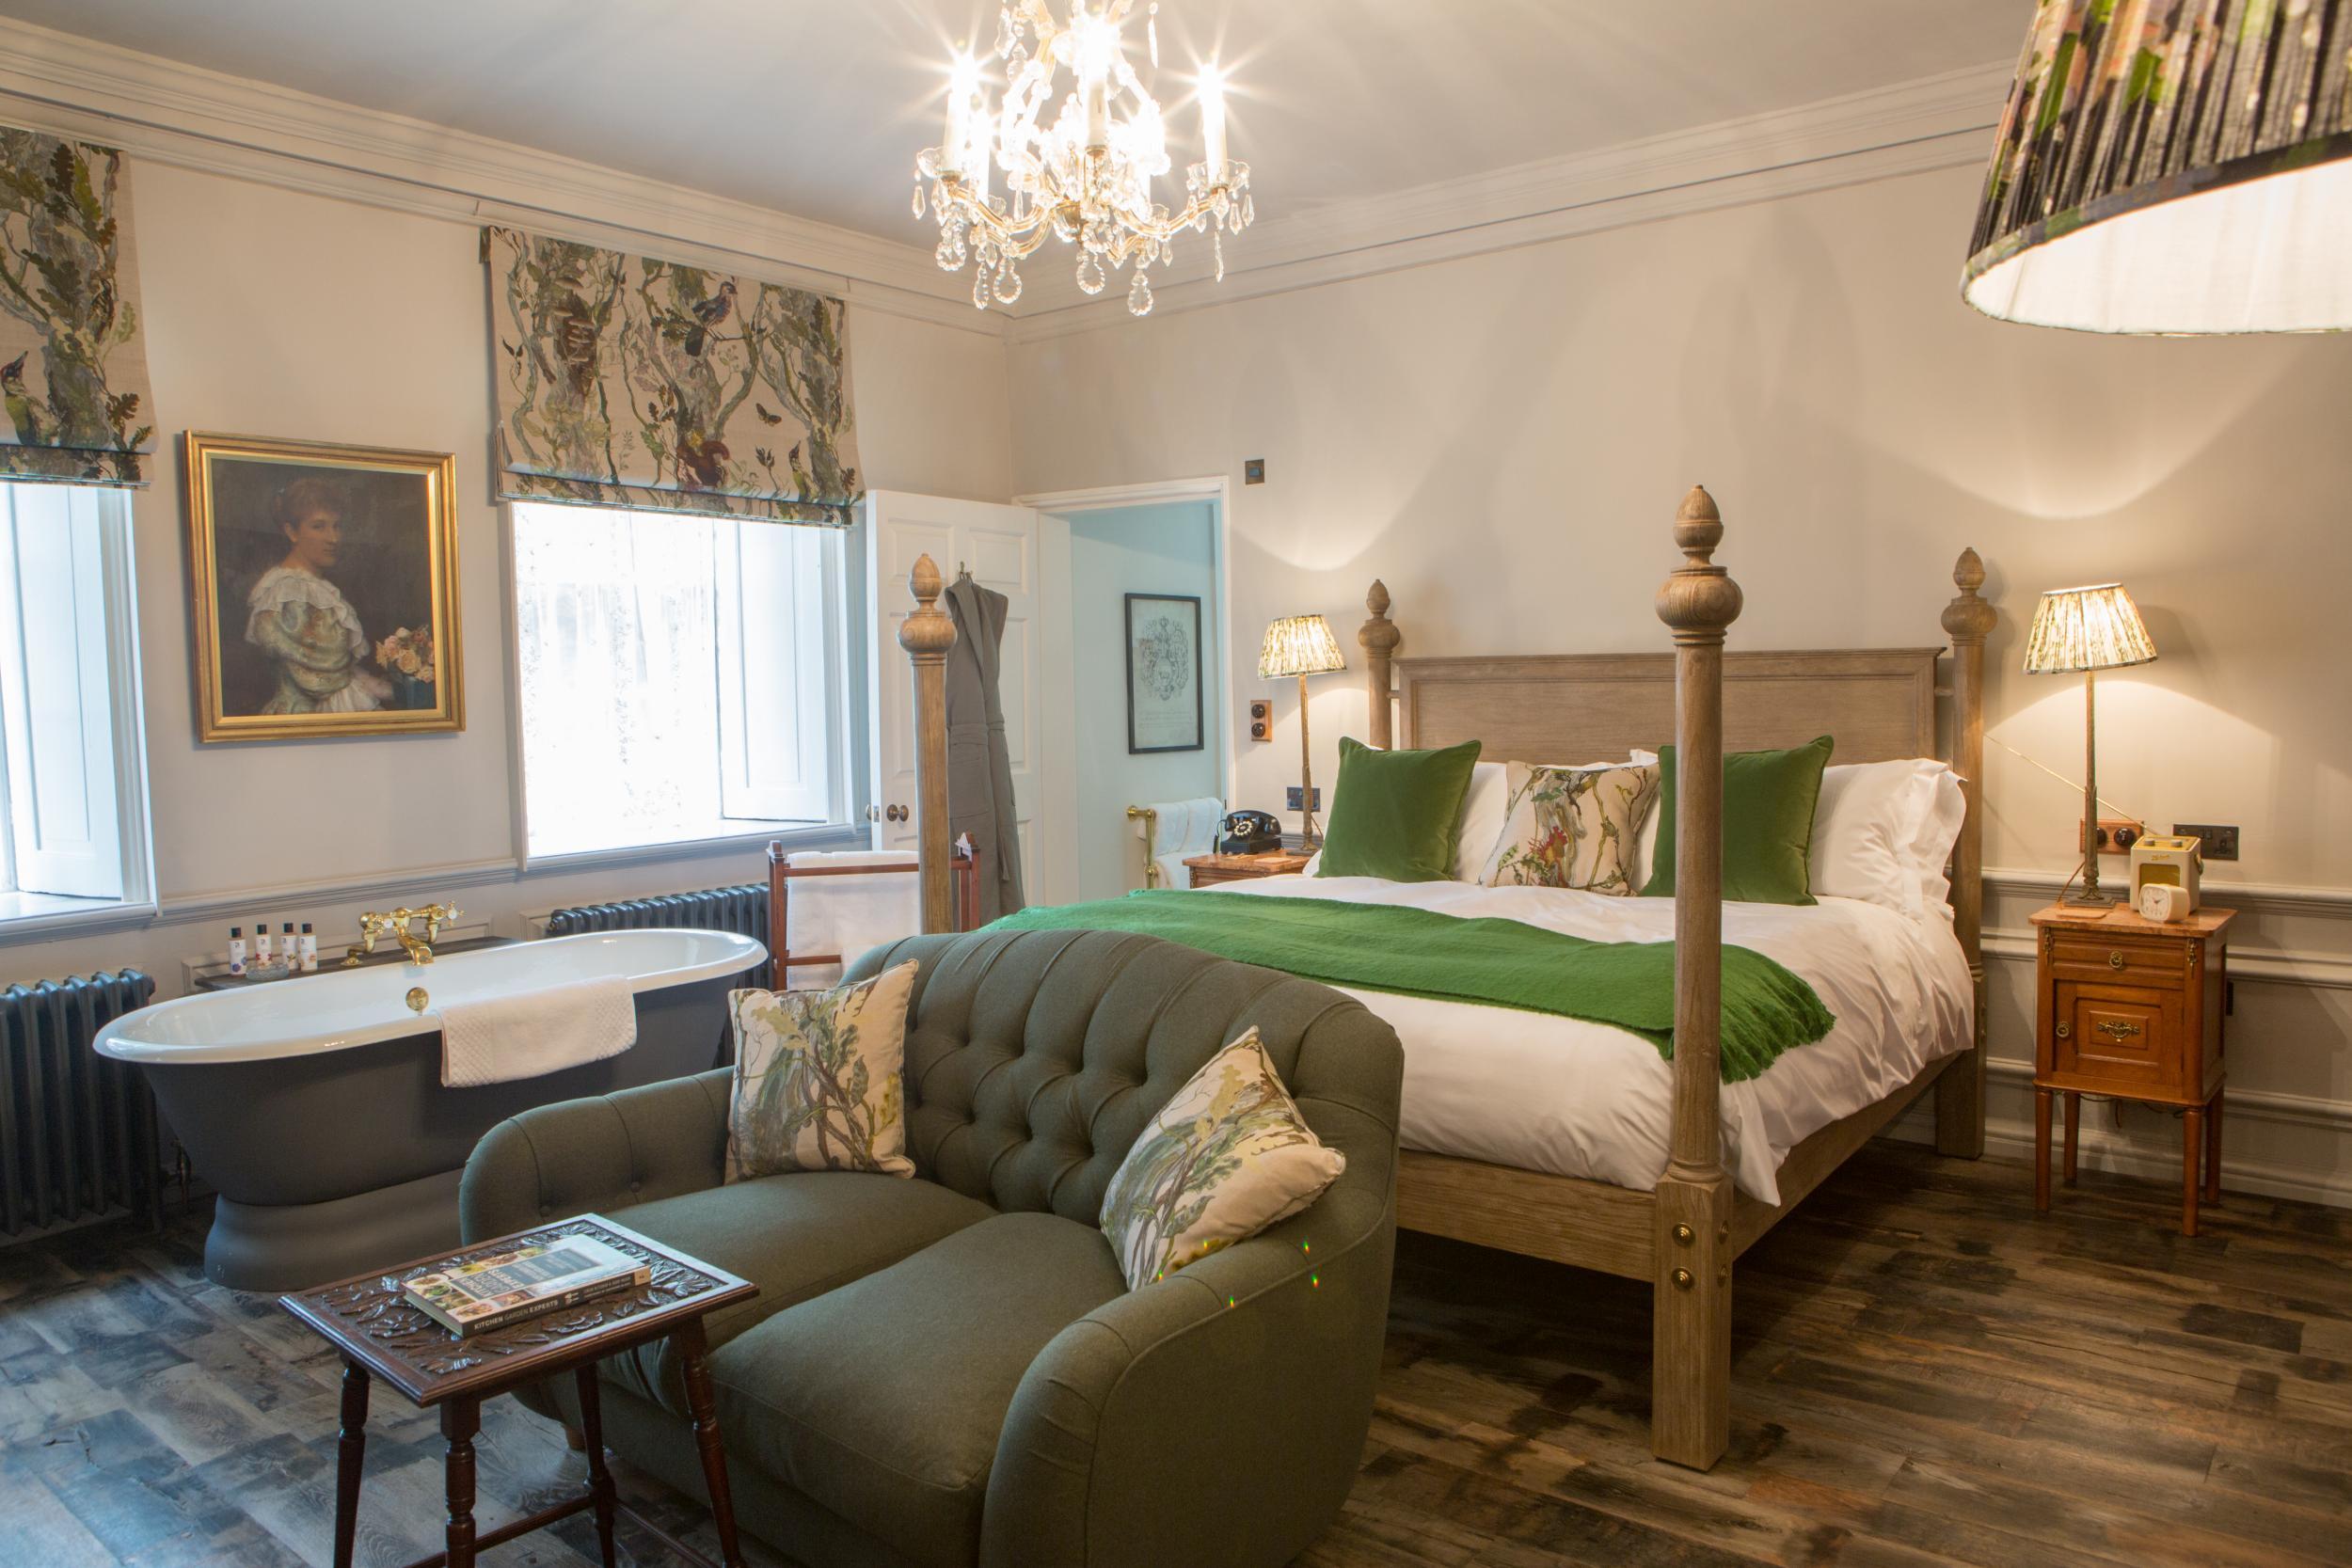 The bedrooms are ‘country-luxe’